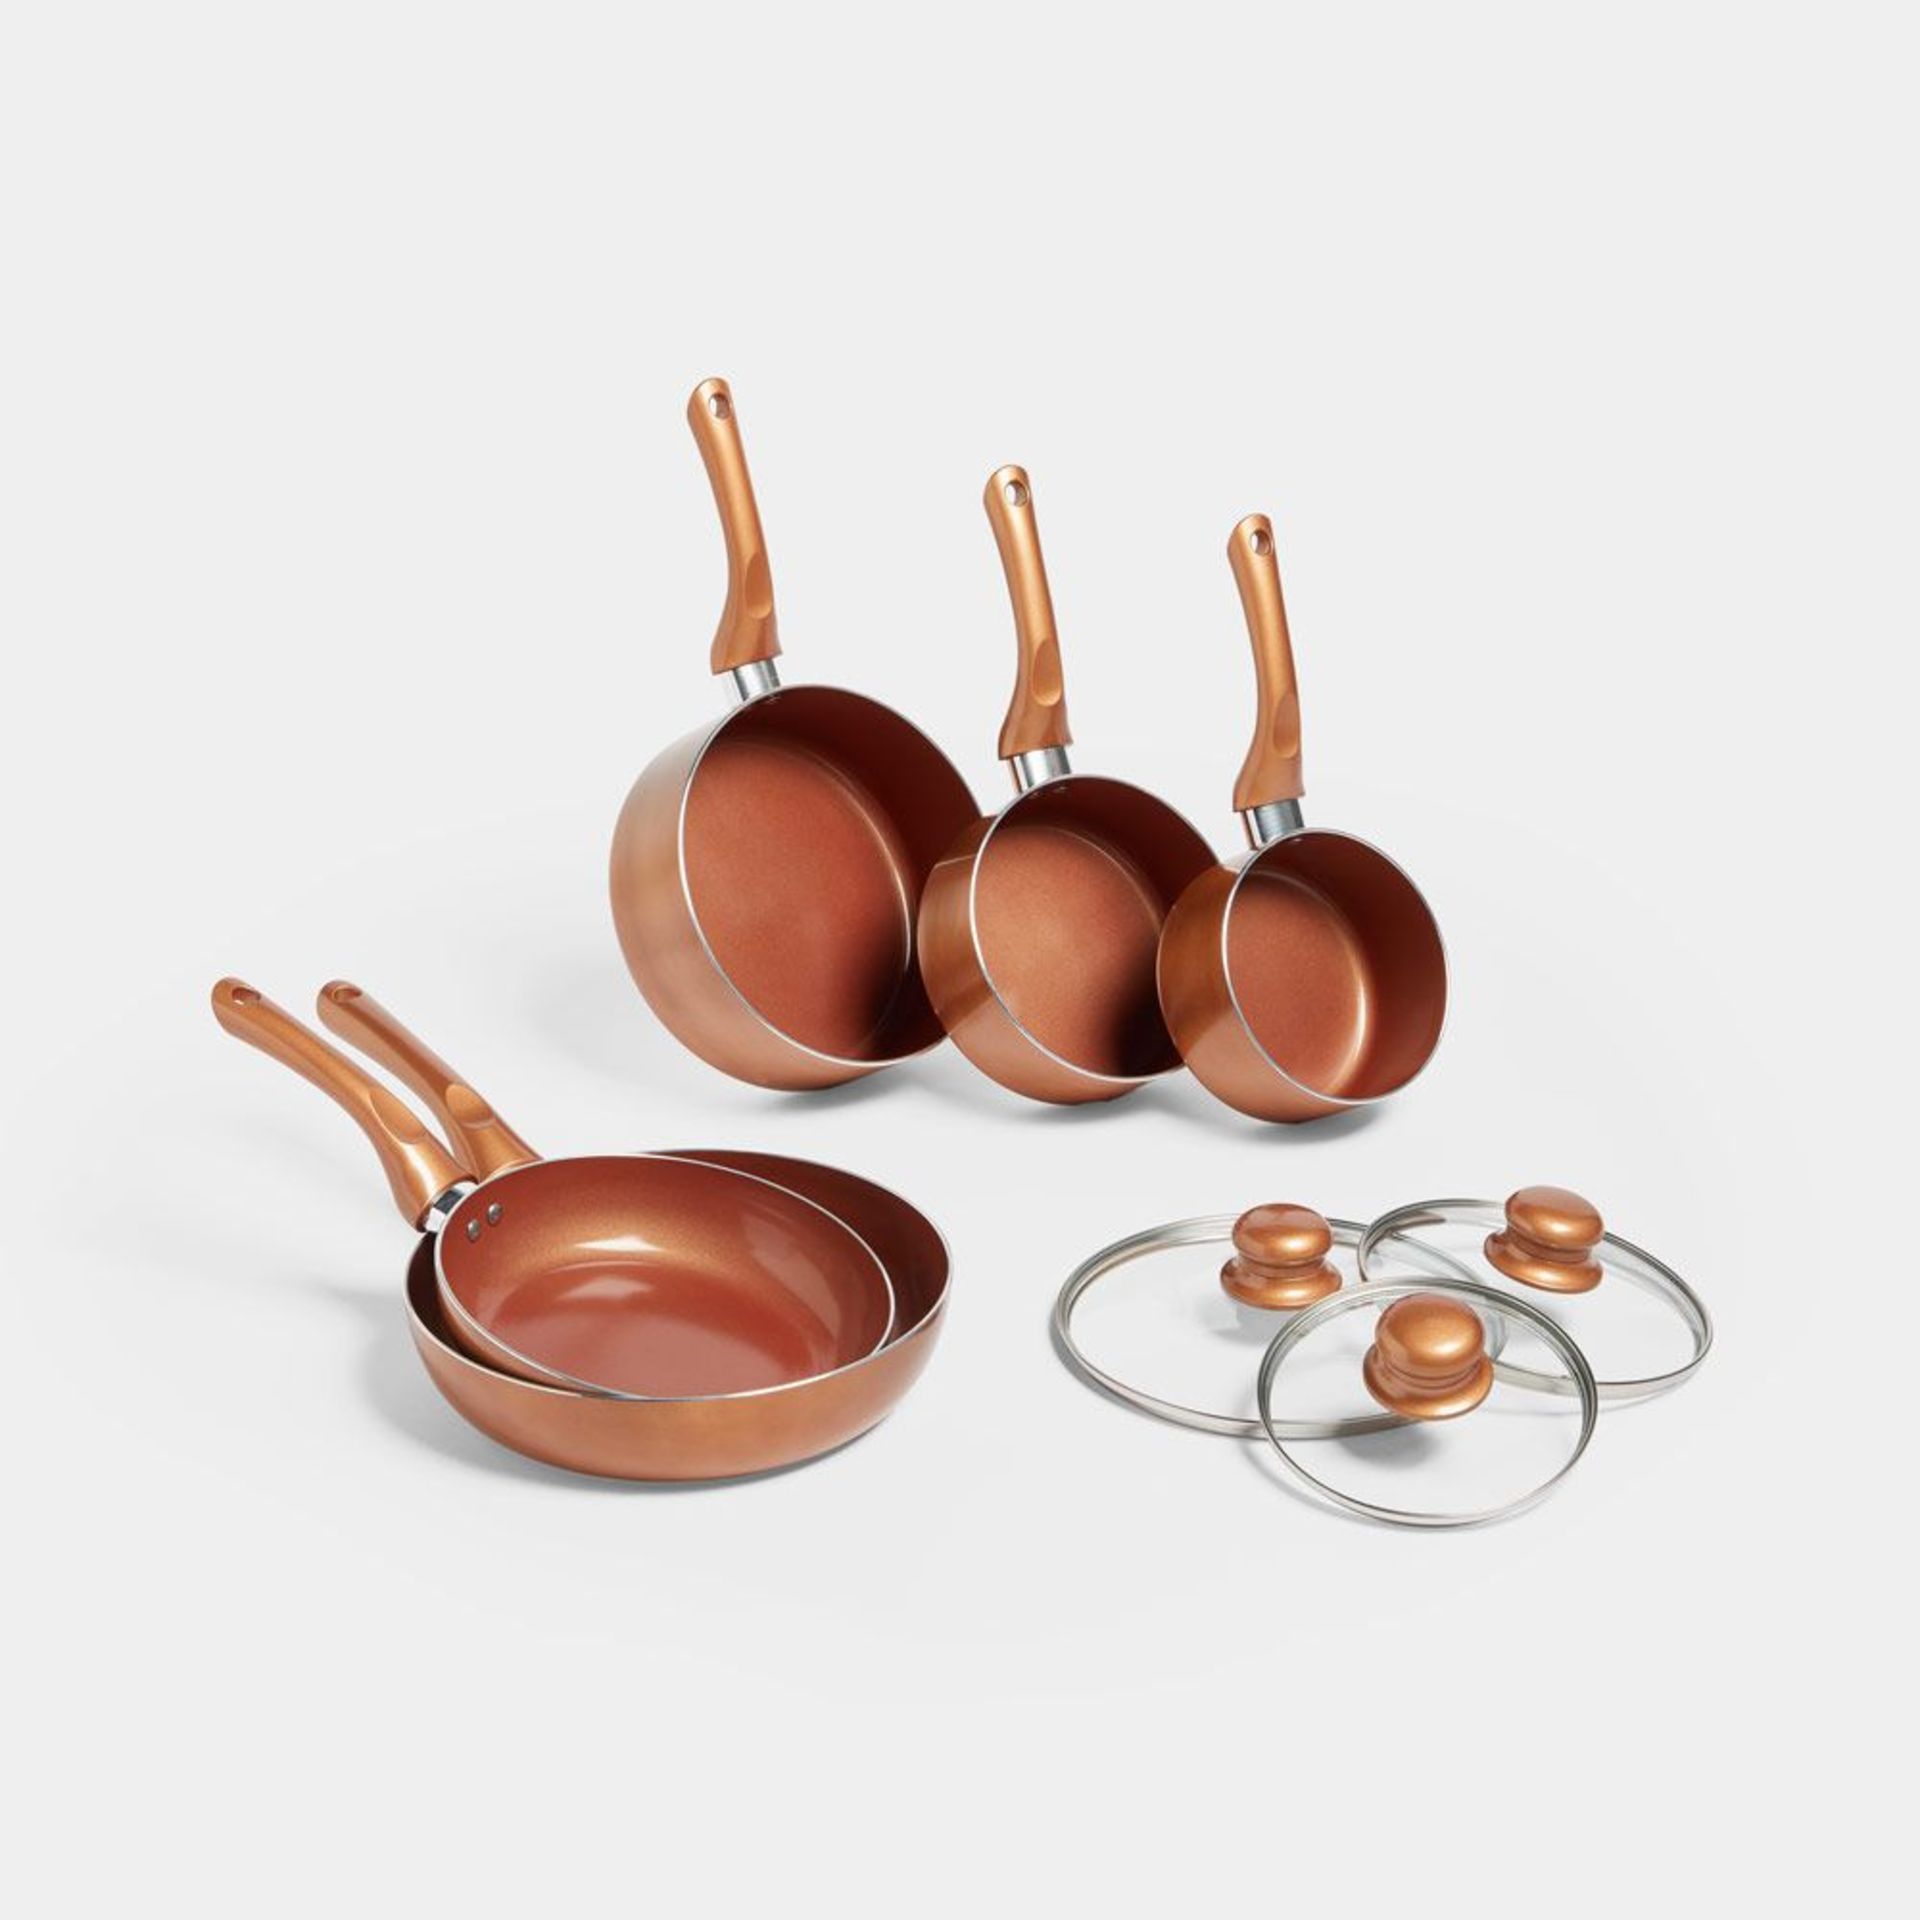 5pc Copper Effect Pan Set. Cook up a storm with this 5-piece copper effect pan set, including